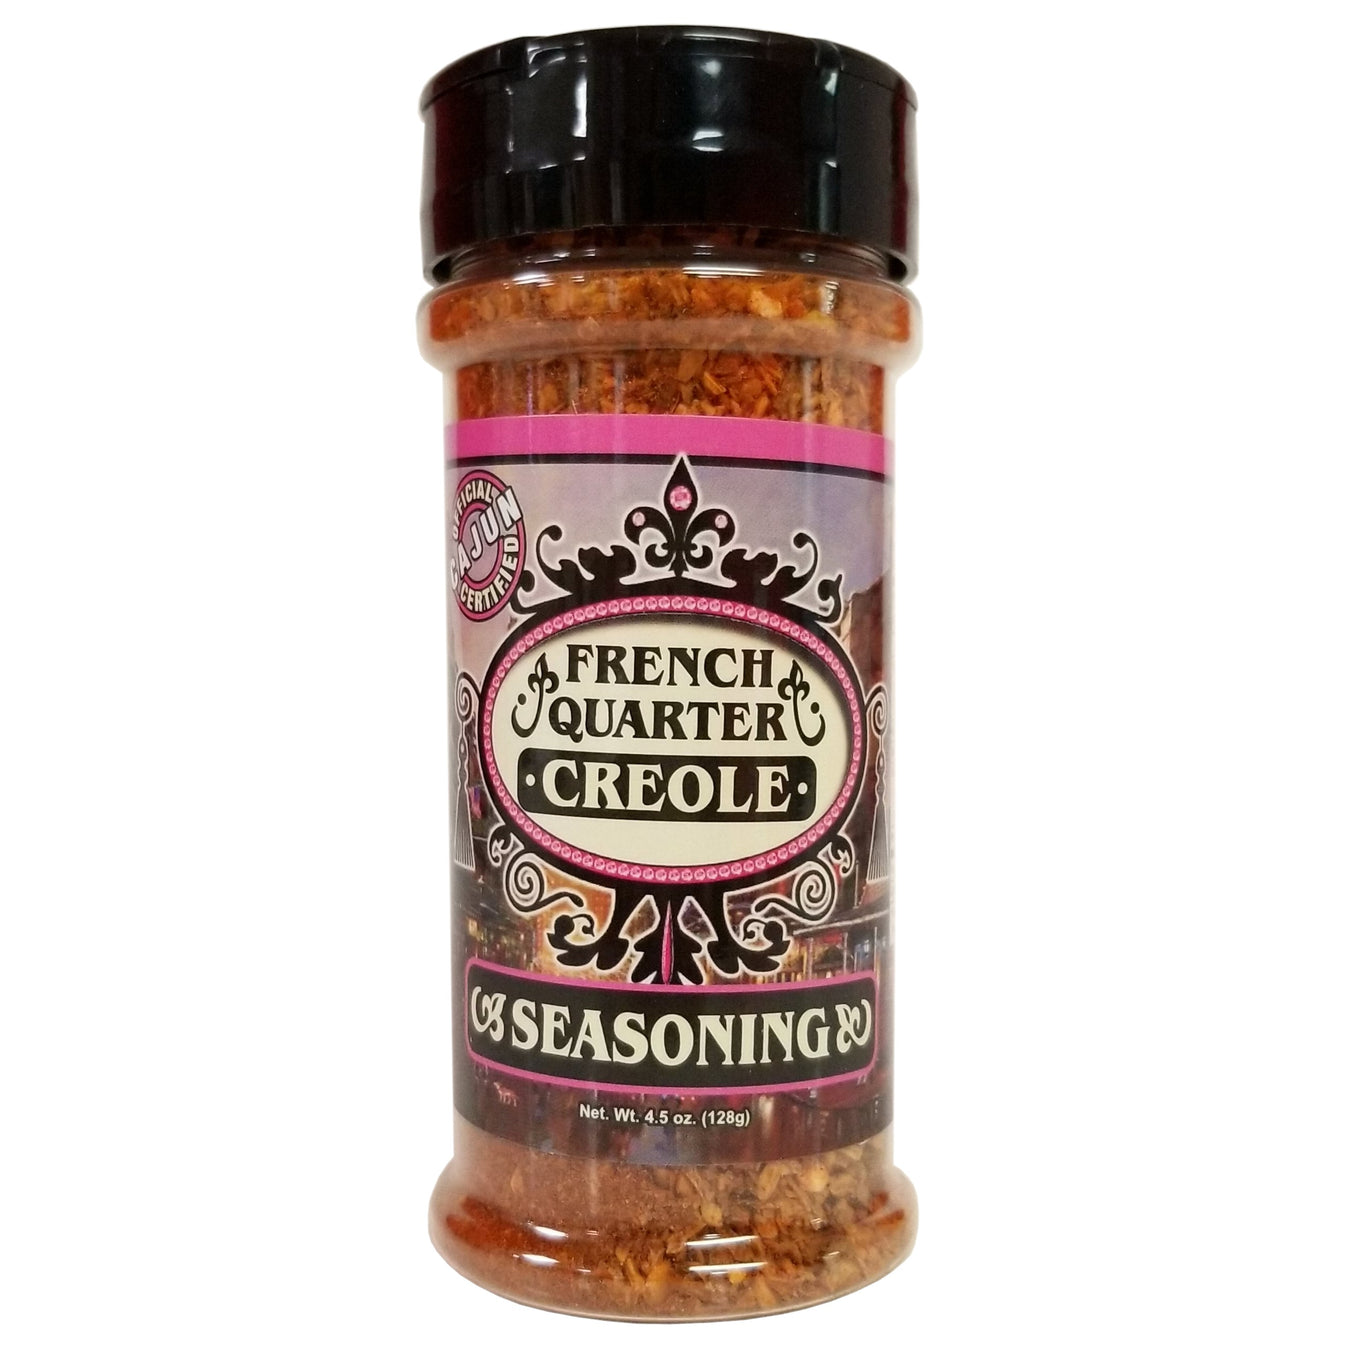 Cajun and Creole Flavors